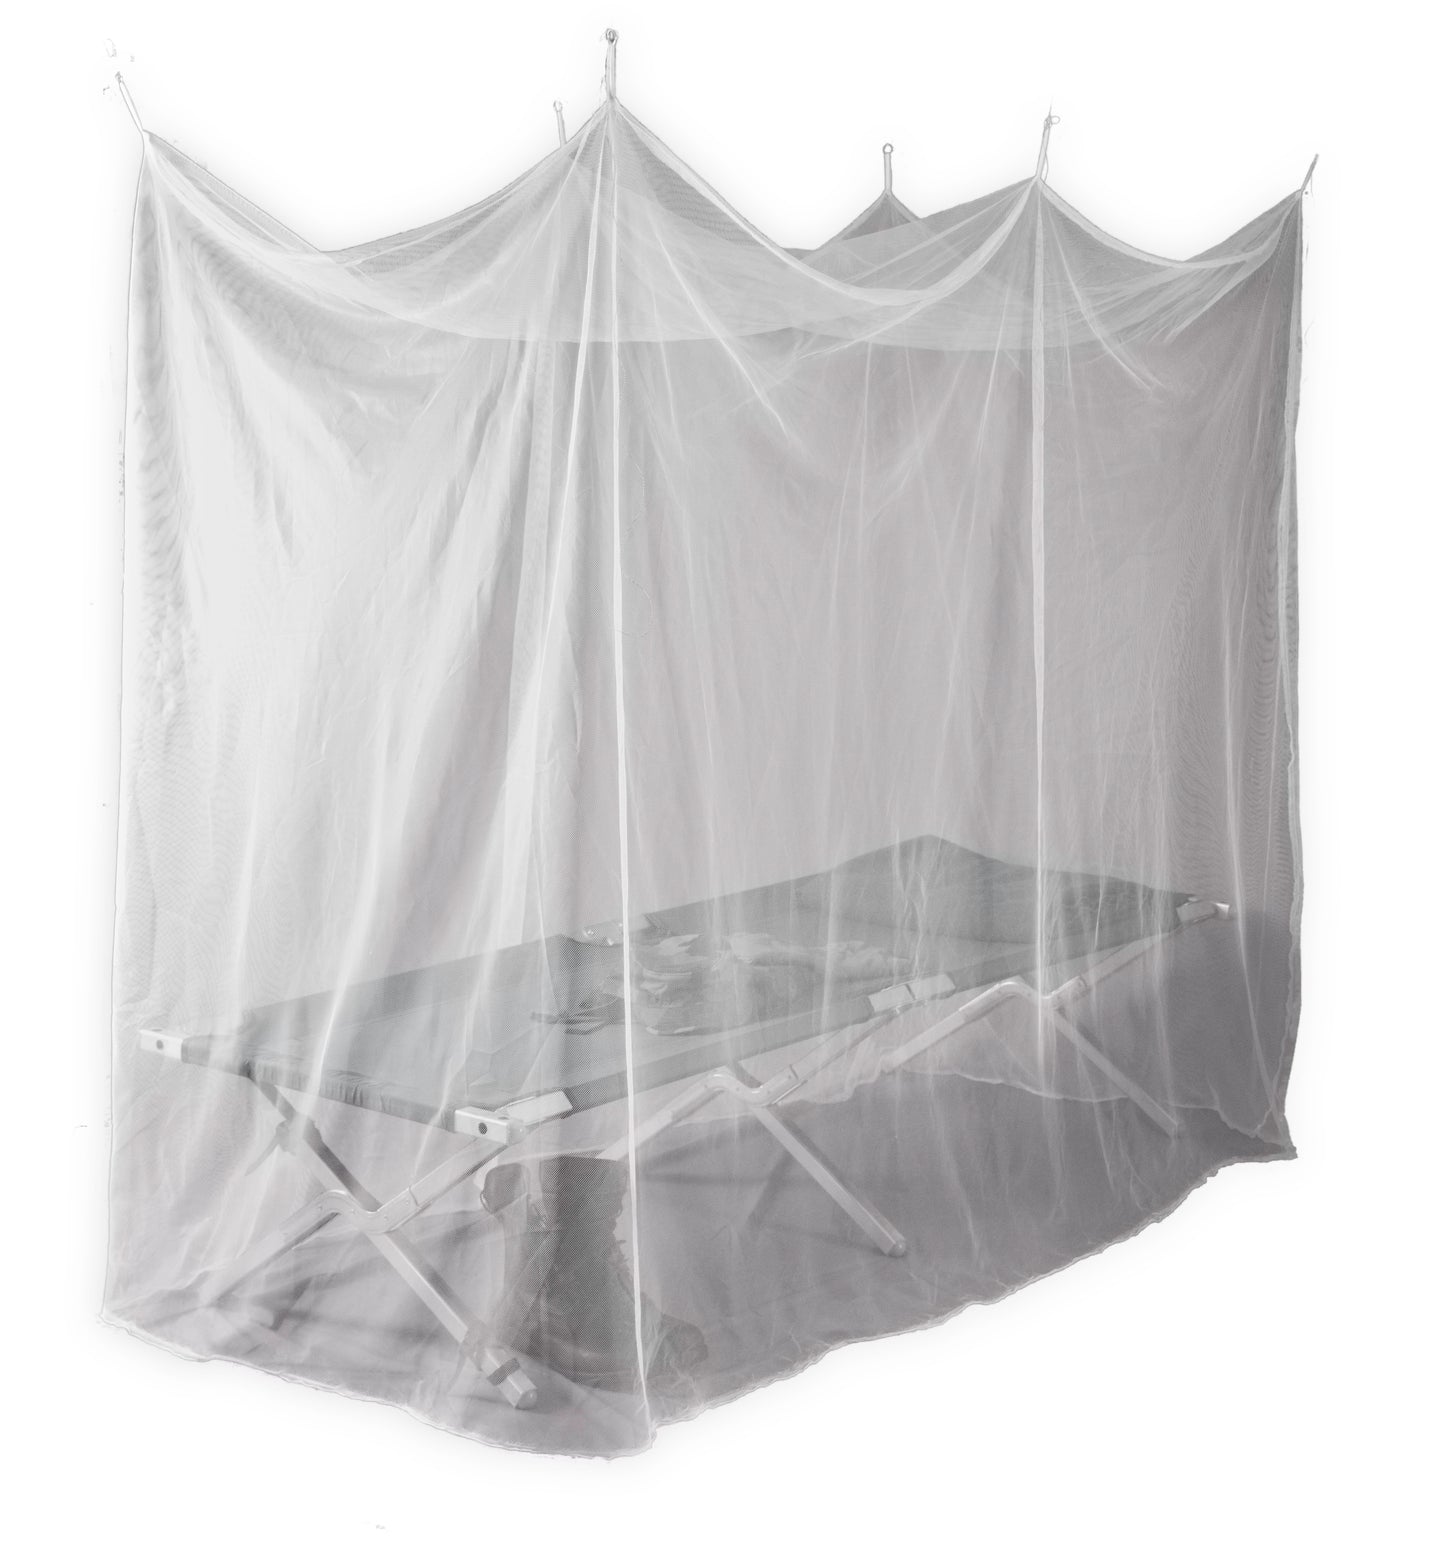 Expedition single mosquito net